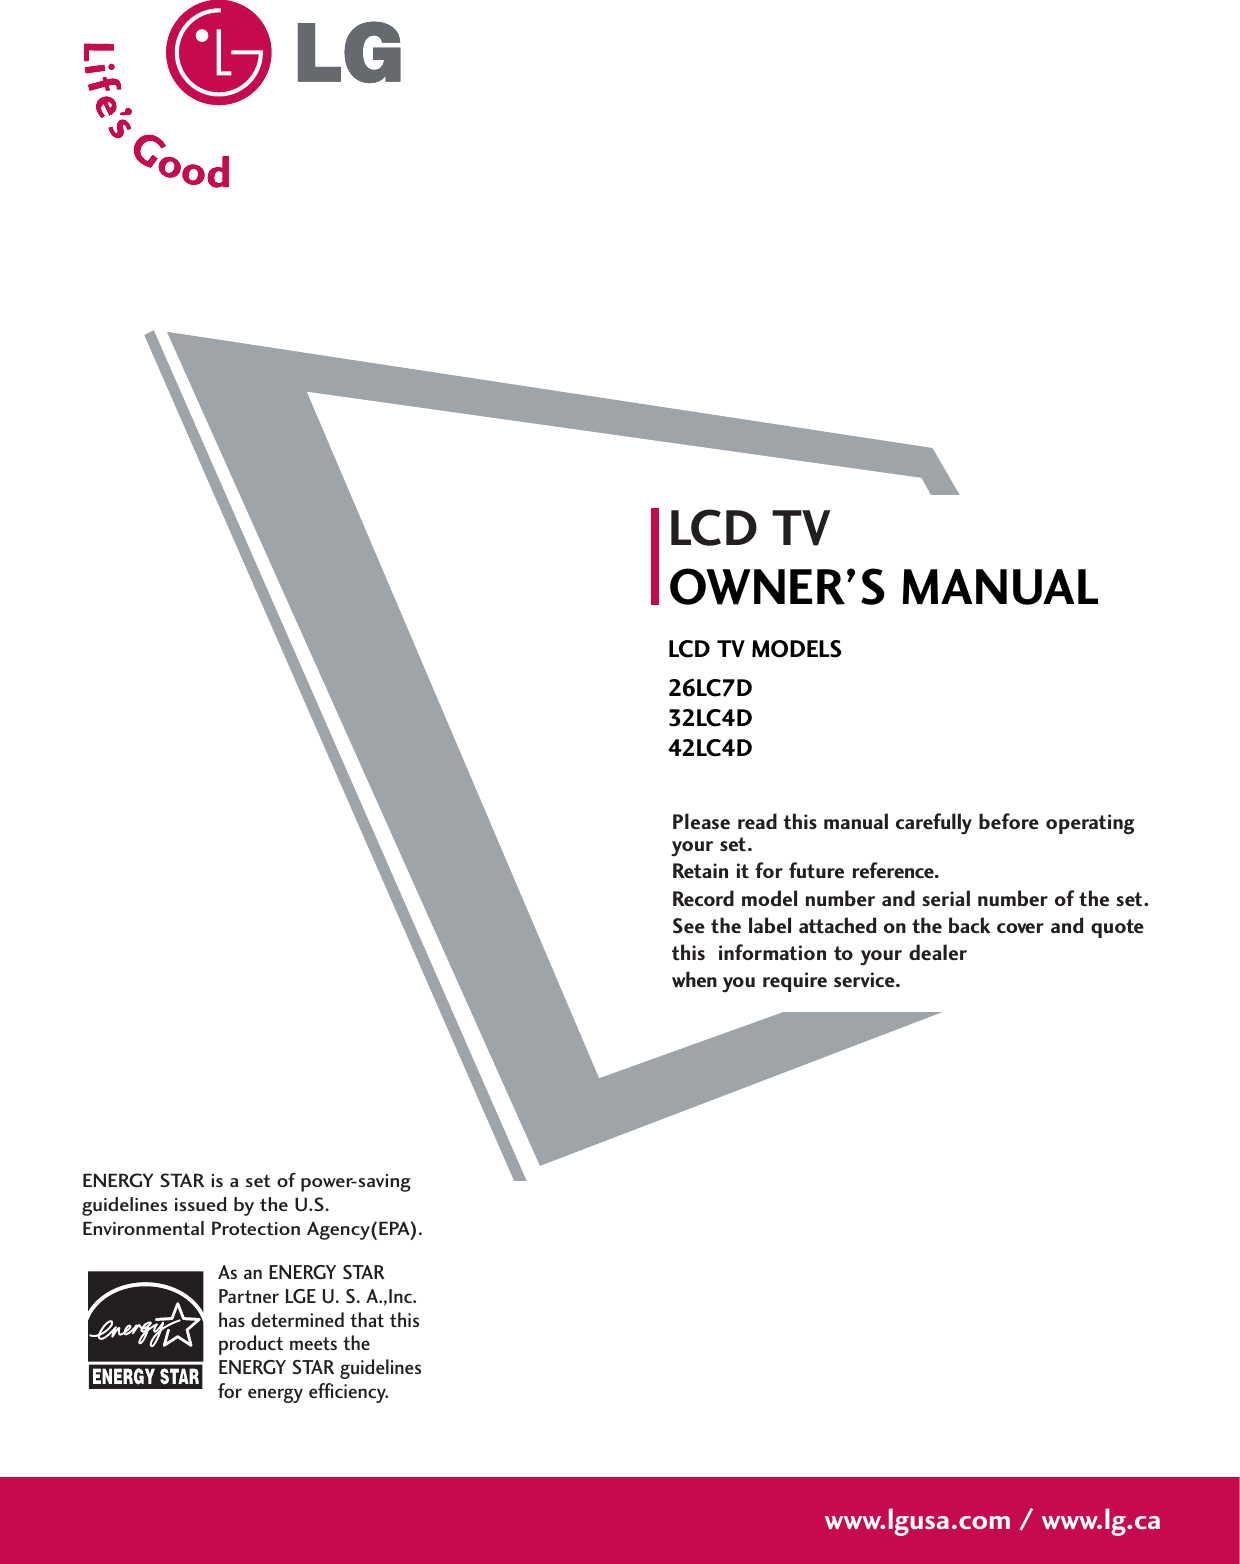 Please read this manual carefully before operatingyour set. Retain it for future reference.Record model number and serial number of the set. See the label attached on the back cover and quote this  information to your dealer when you require service.LCD TVOWNER’S MANUALLCD TV MODELS26LC7D32LC4D42LC4Dwww.lgusa.com / www.lg.caAs an ENERGY STARPartner LGE U. S. A.,Inc.has determined that thisproduct meets theENERGY STAR guidelinesfor energy efficiency.ENERGY STAR is a set of power-savingguidelines issued by the U.S.Environmental Protection Agency(EPA).